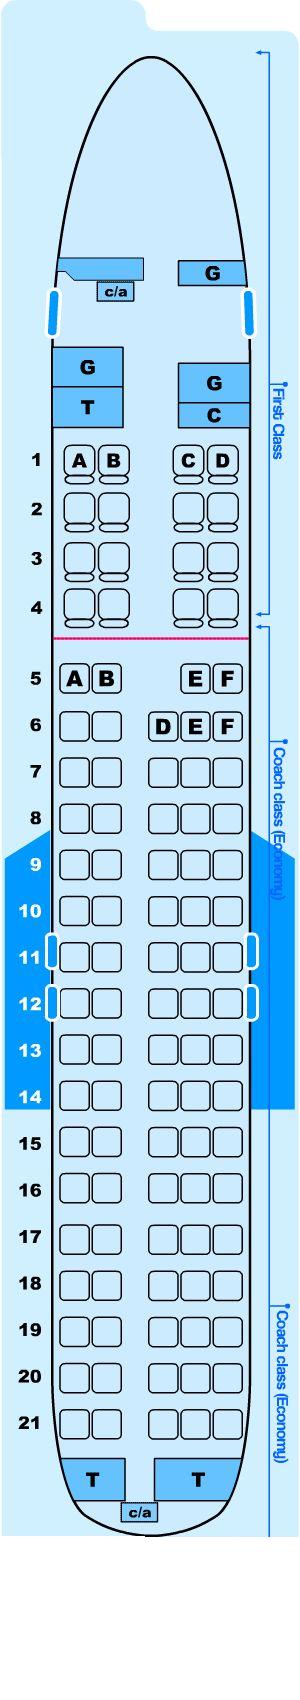 Seat map for Northwest Airlines McDonnell Douglas DC9-30